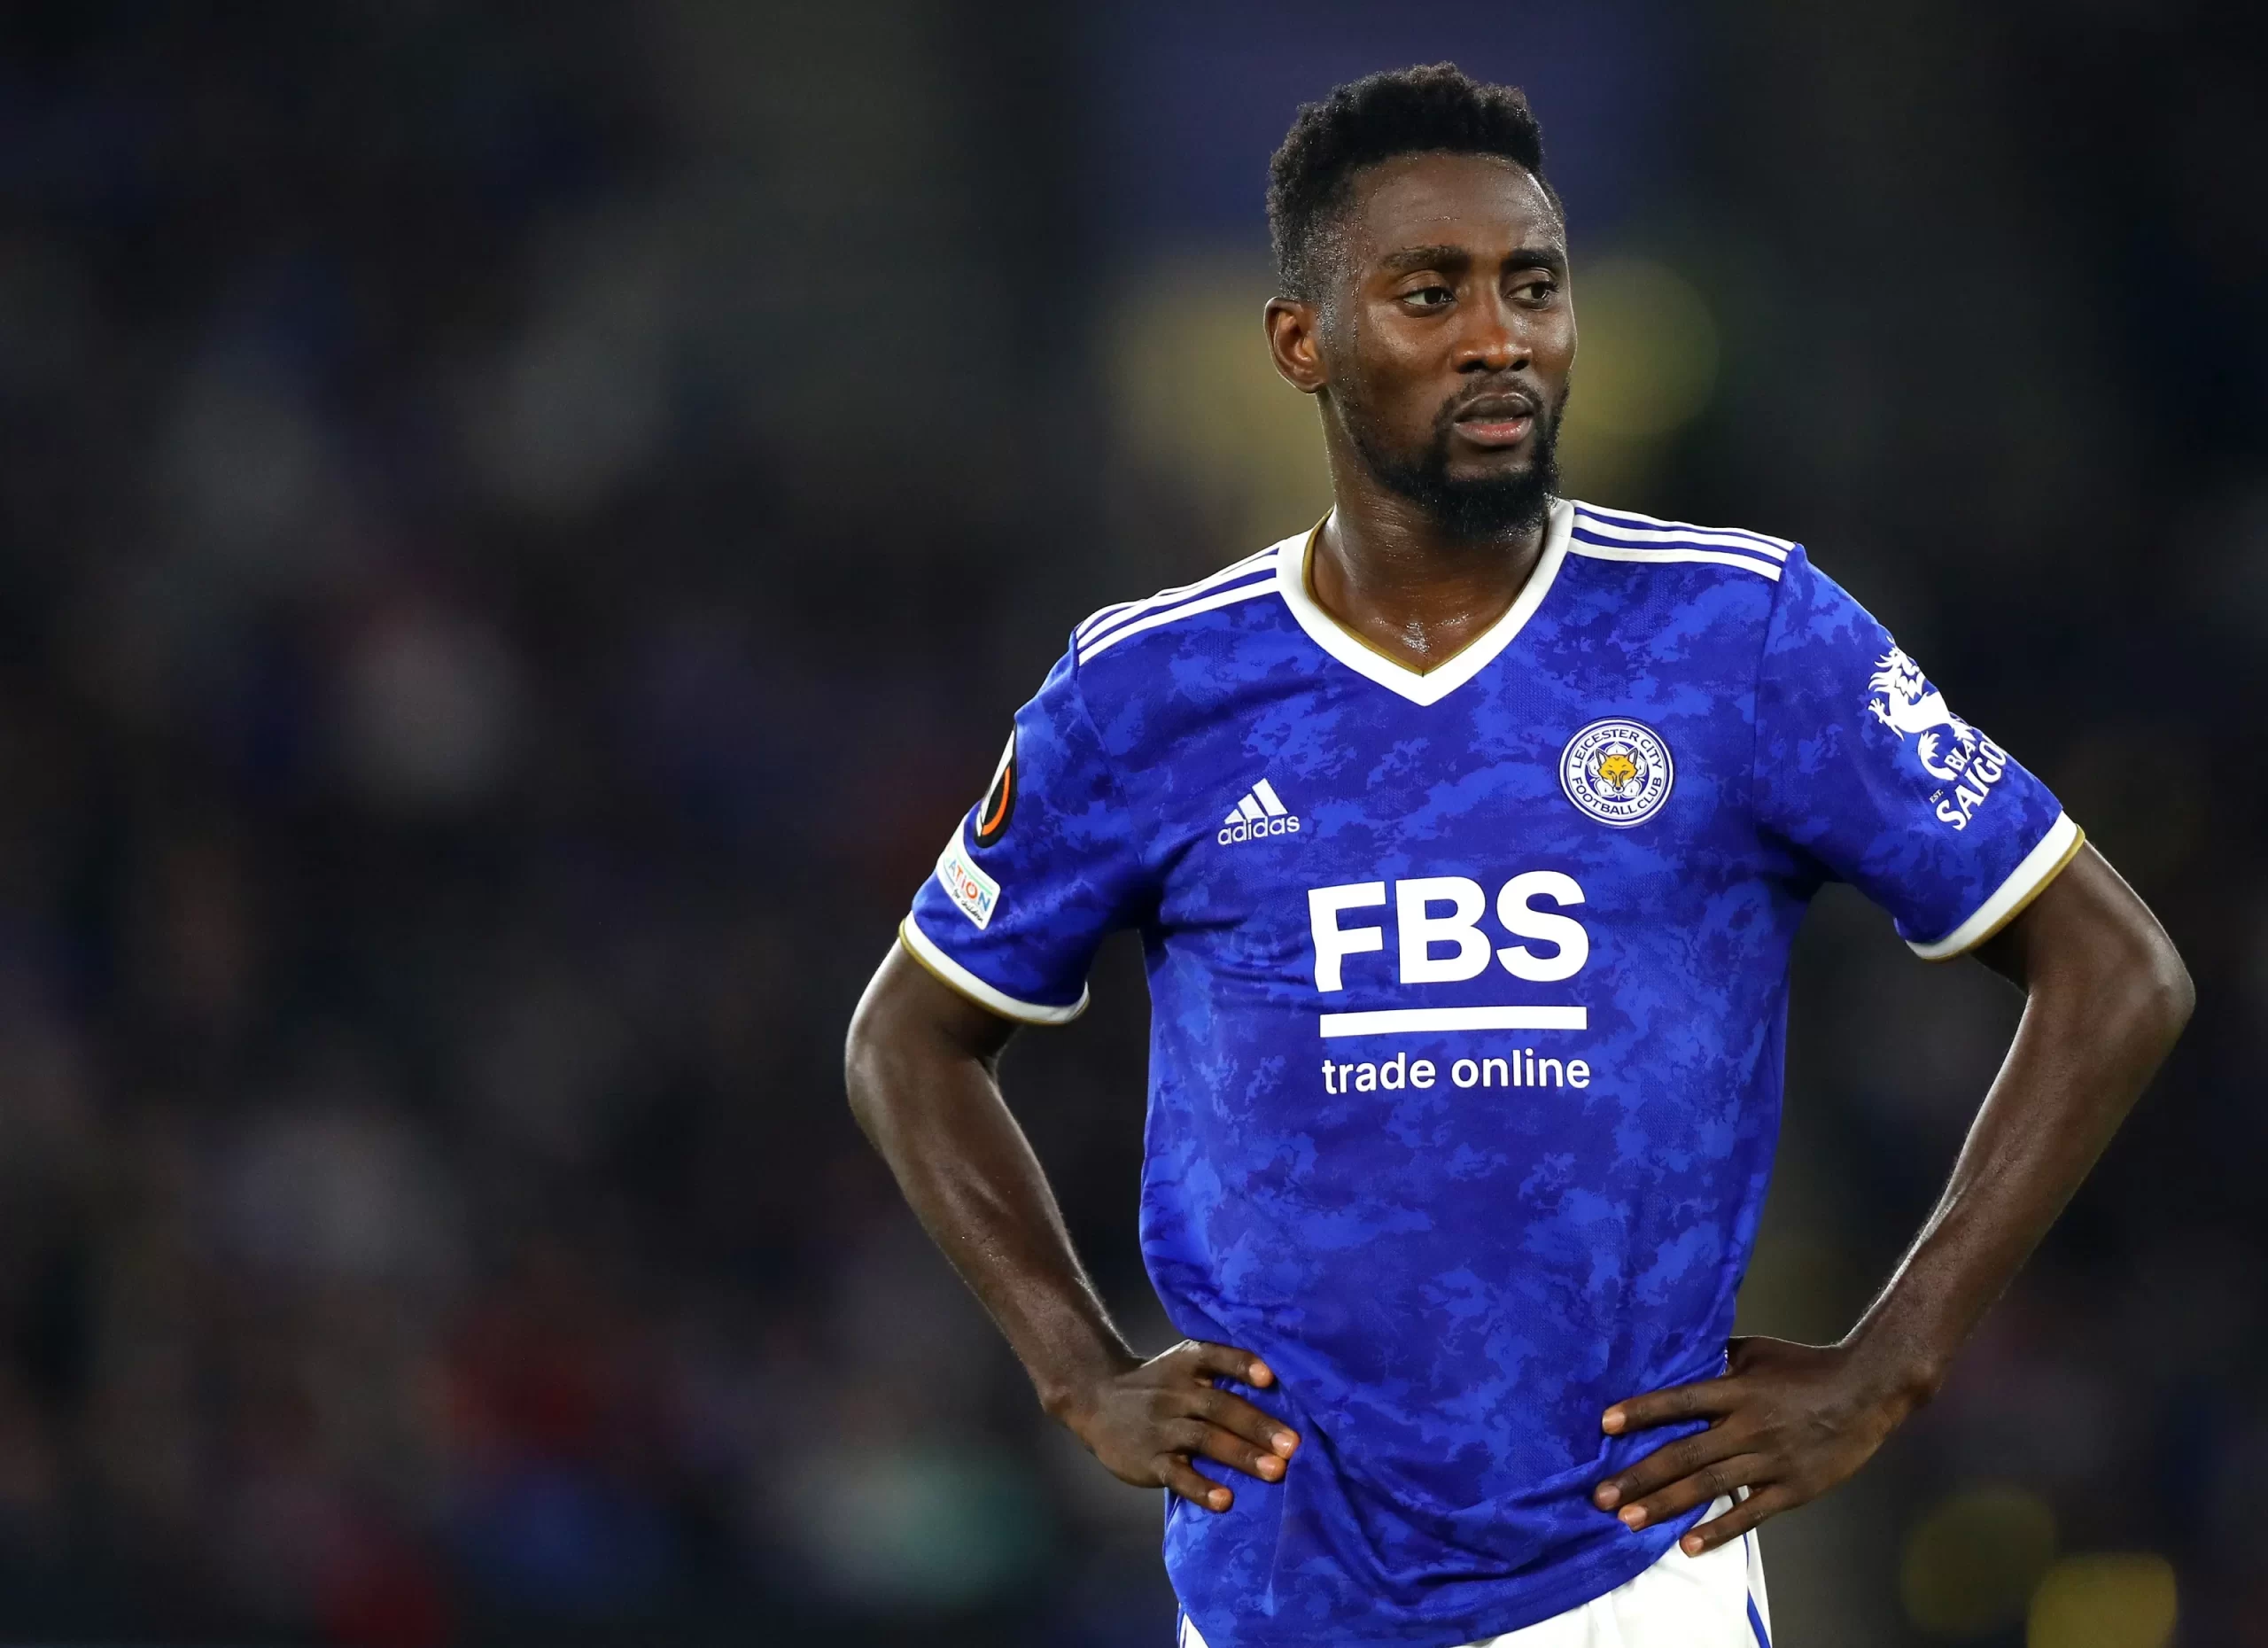 Wilfred Ndidi injured again, to be out for weeks